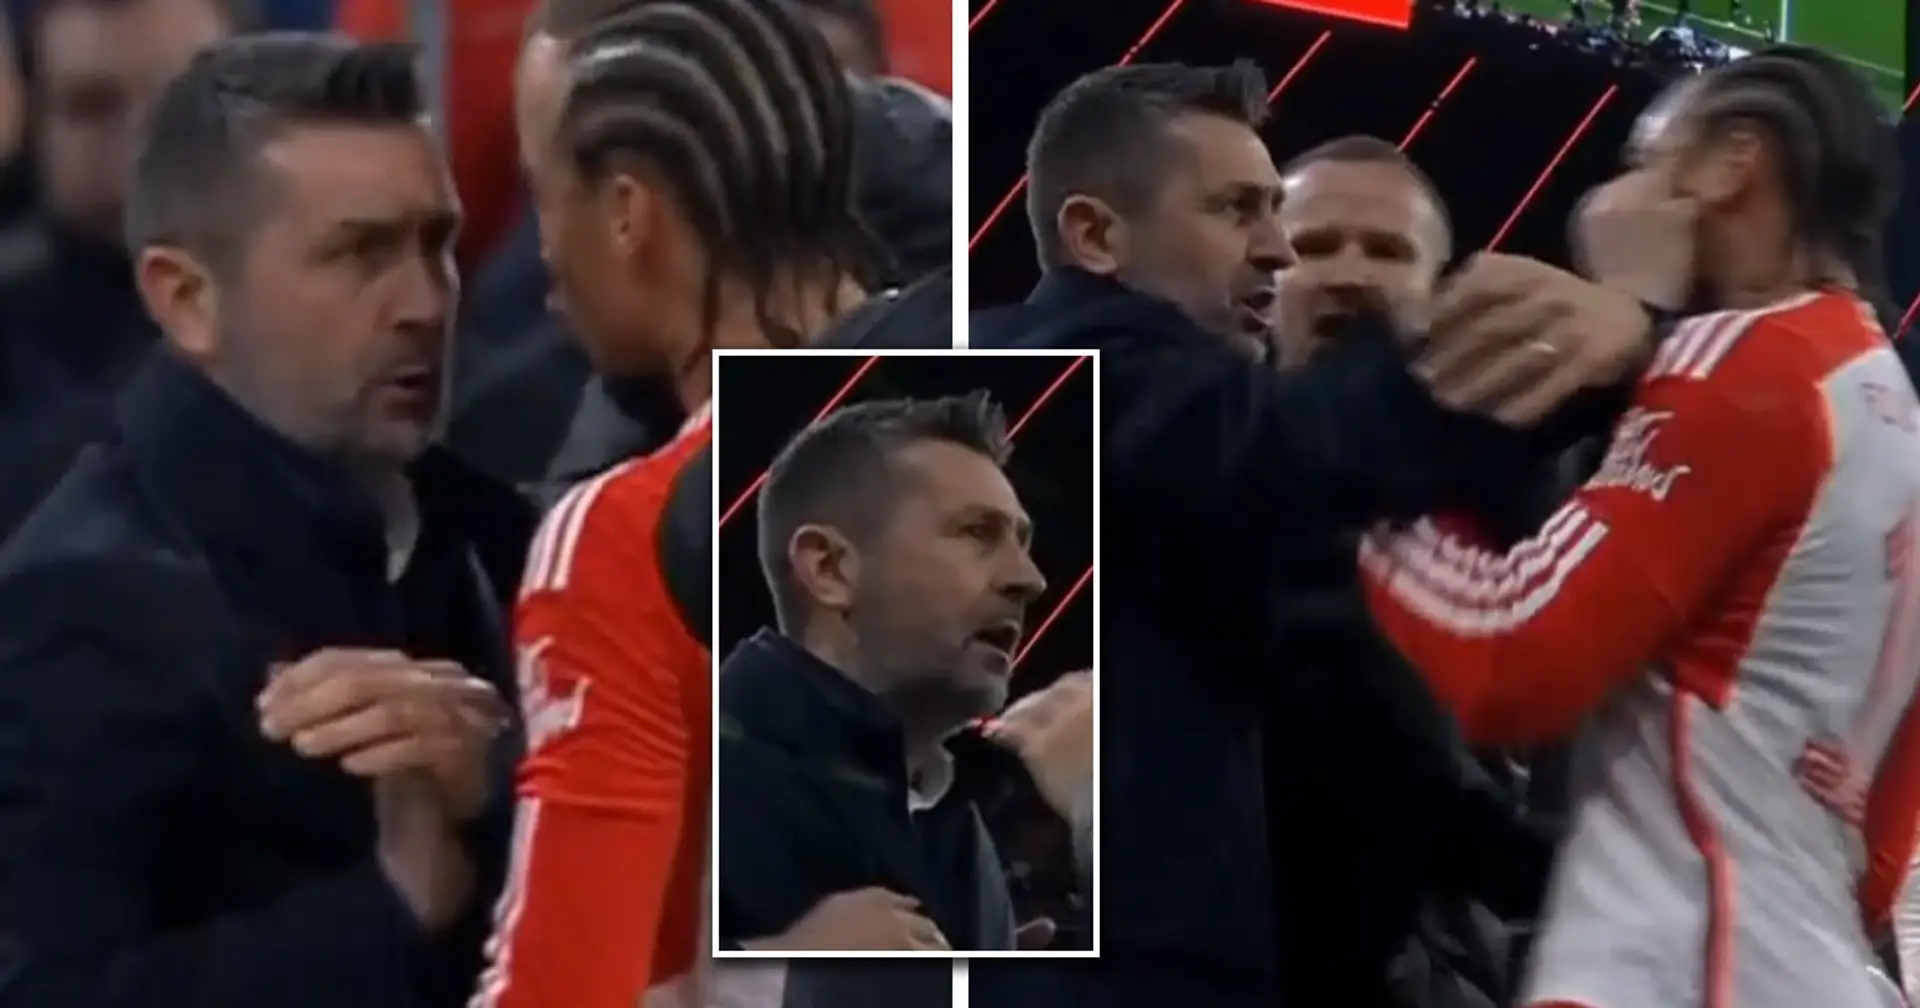 Union Berlin manager is sent off for shoving Leroy Sane in the face on two occasions